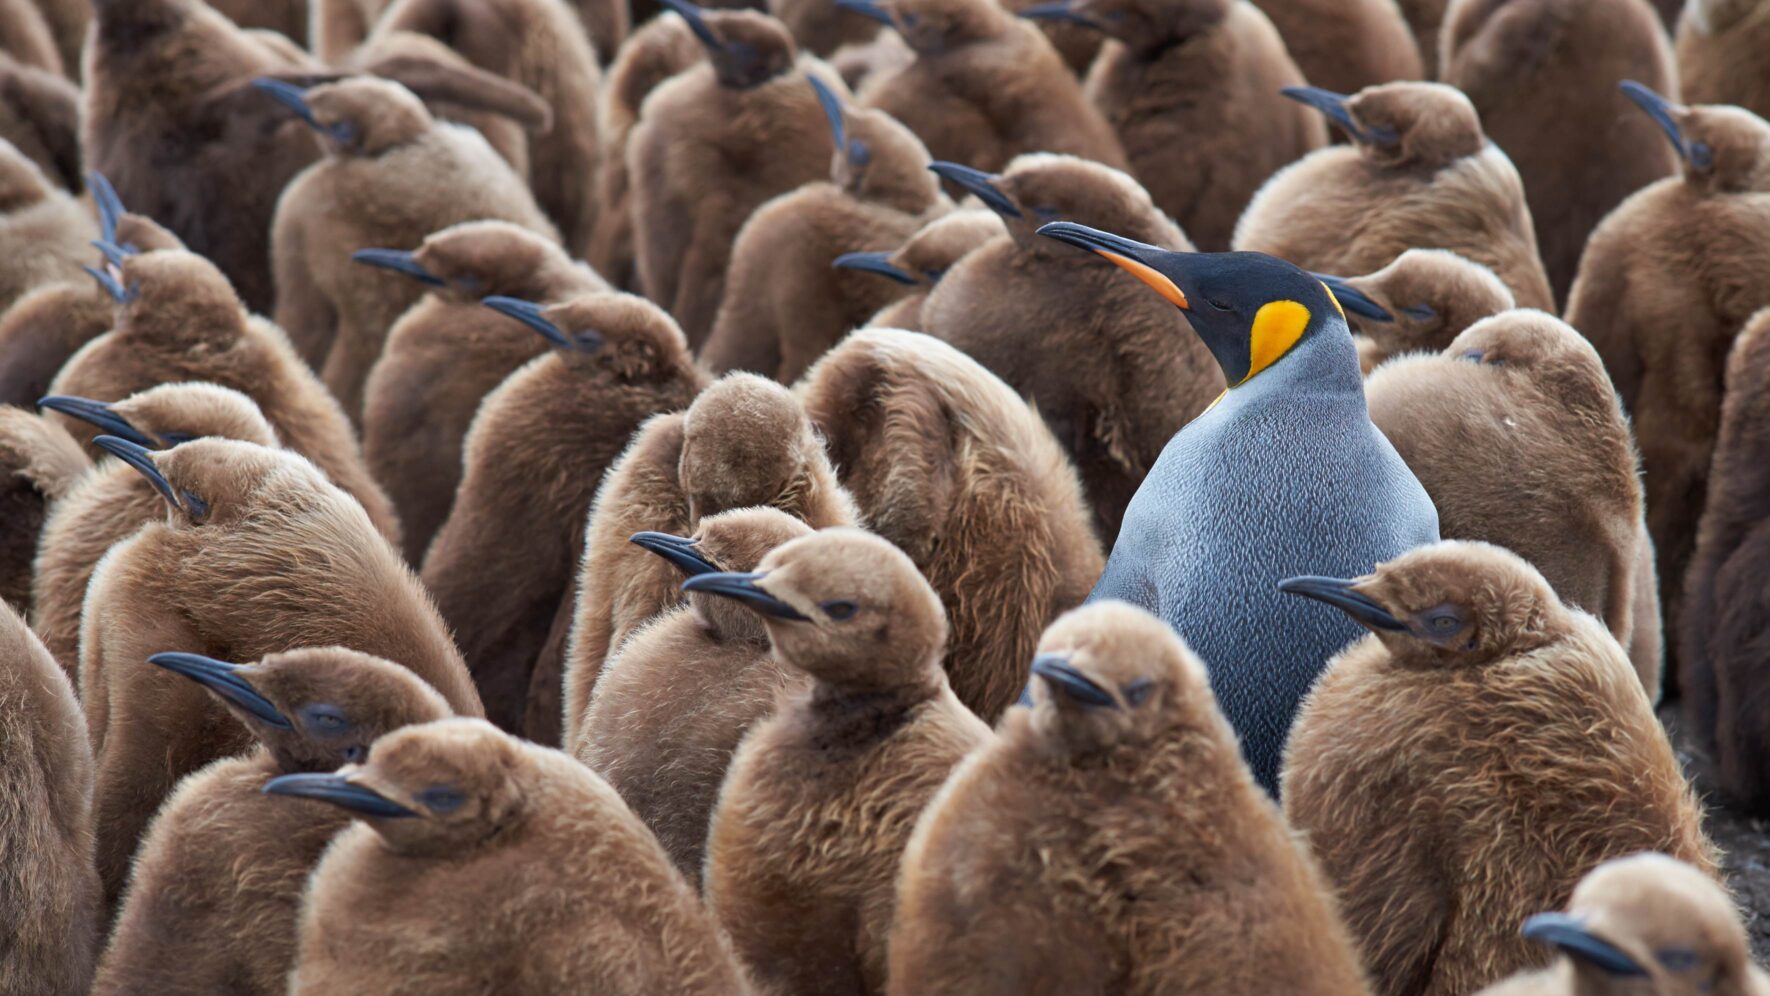 One adult emperor penguin sticking out in the middle of a crowd of juveniles